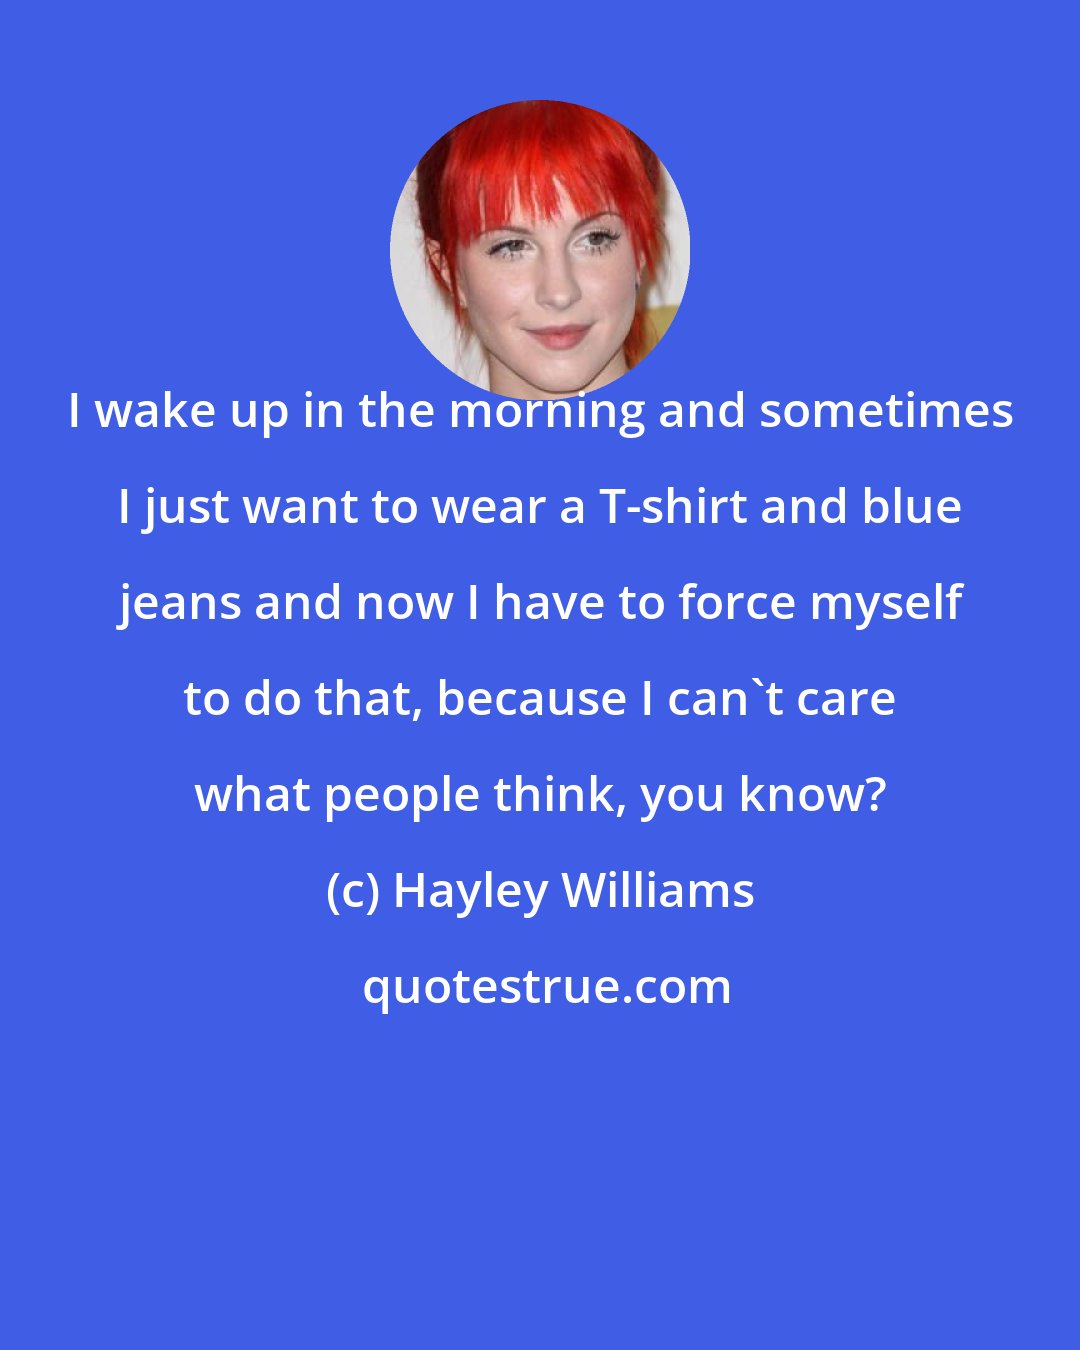 Hayley Williams: I wake up in the morning and sometimes I just want to wear a T-shirt and blue jeans and now I have to force myself to do that, because I can't care what people think, you know?